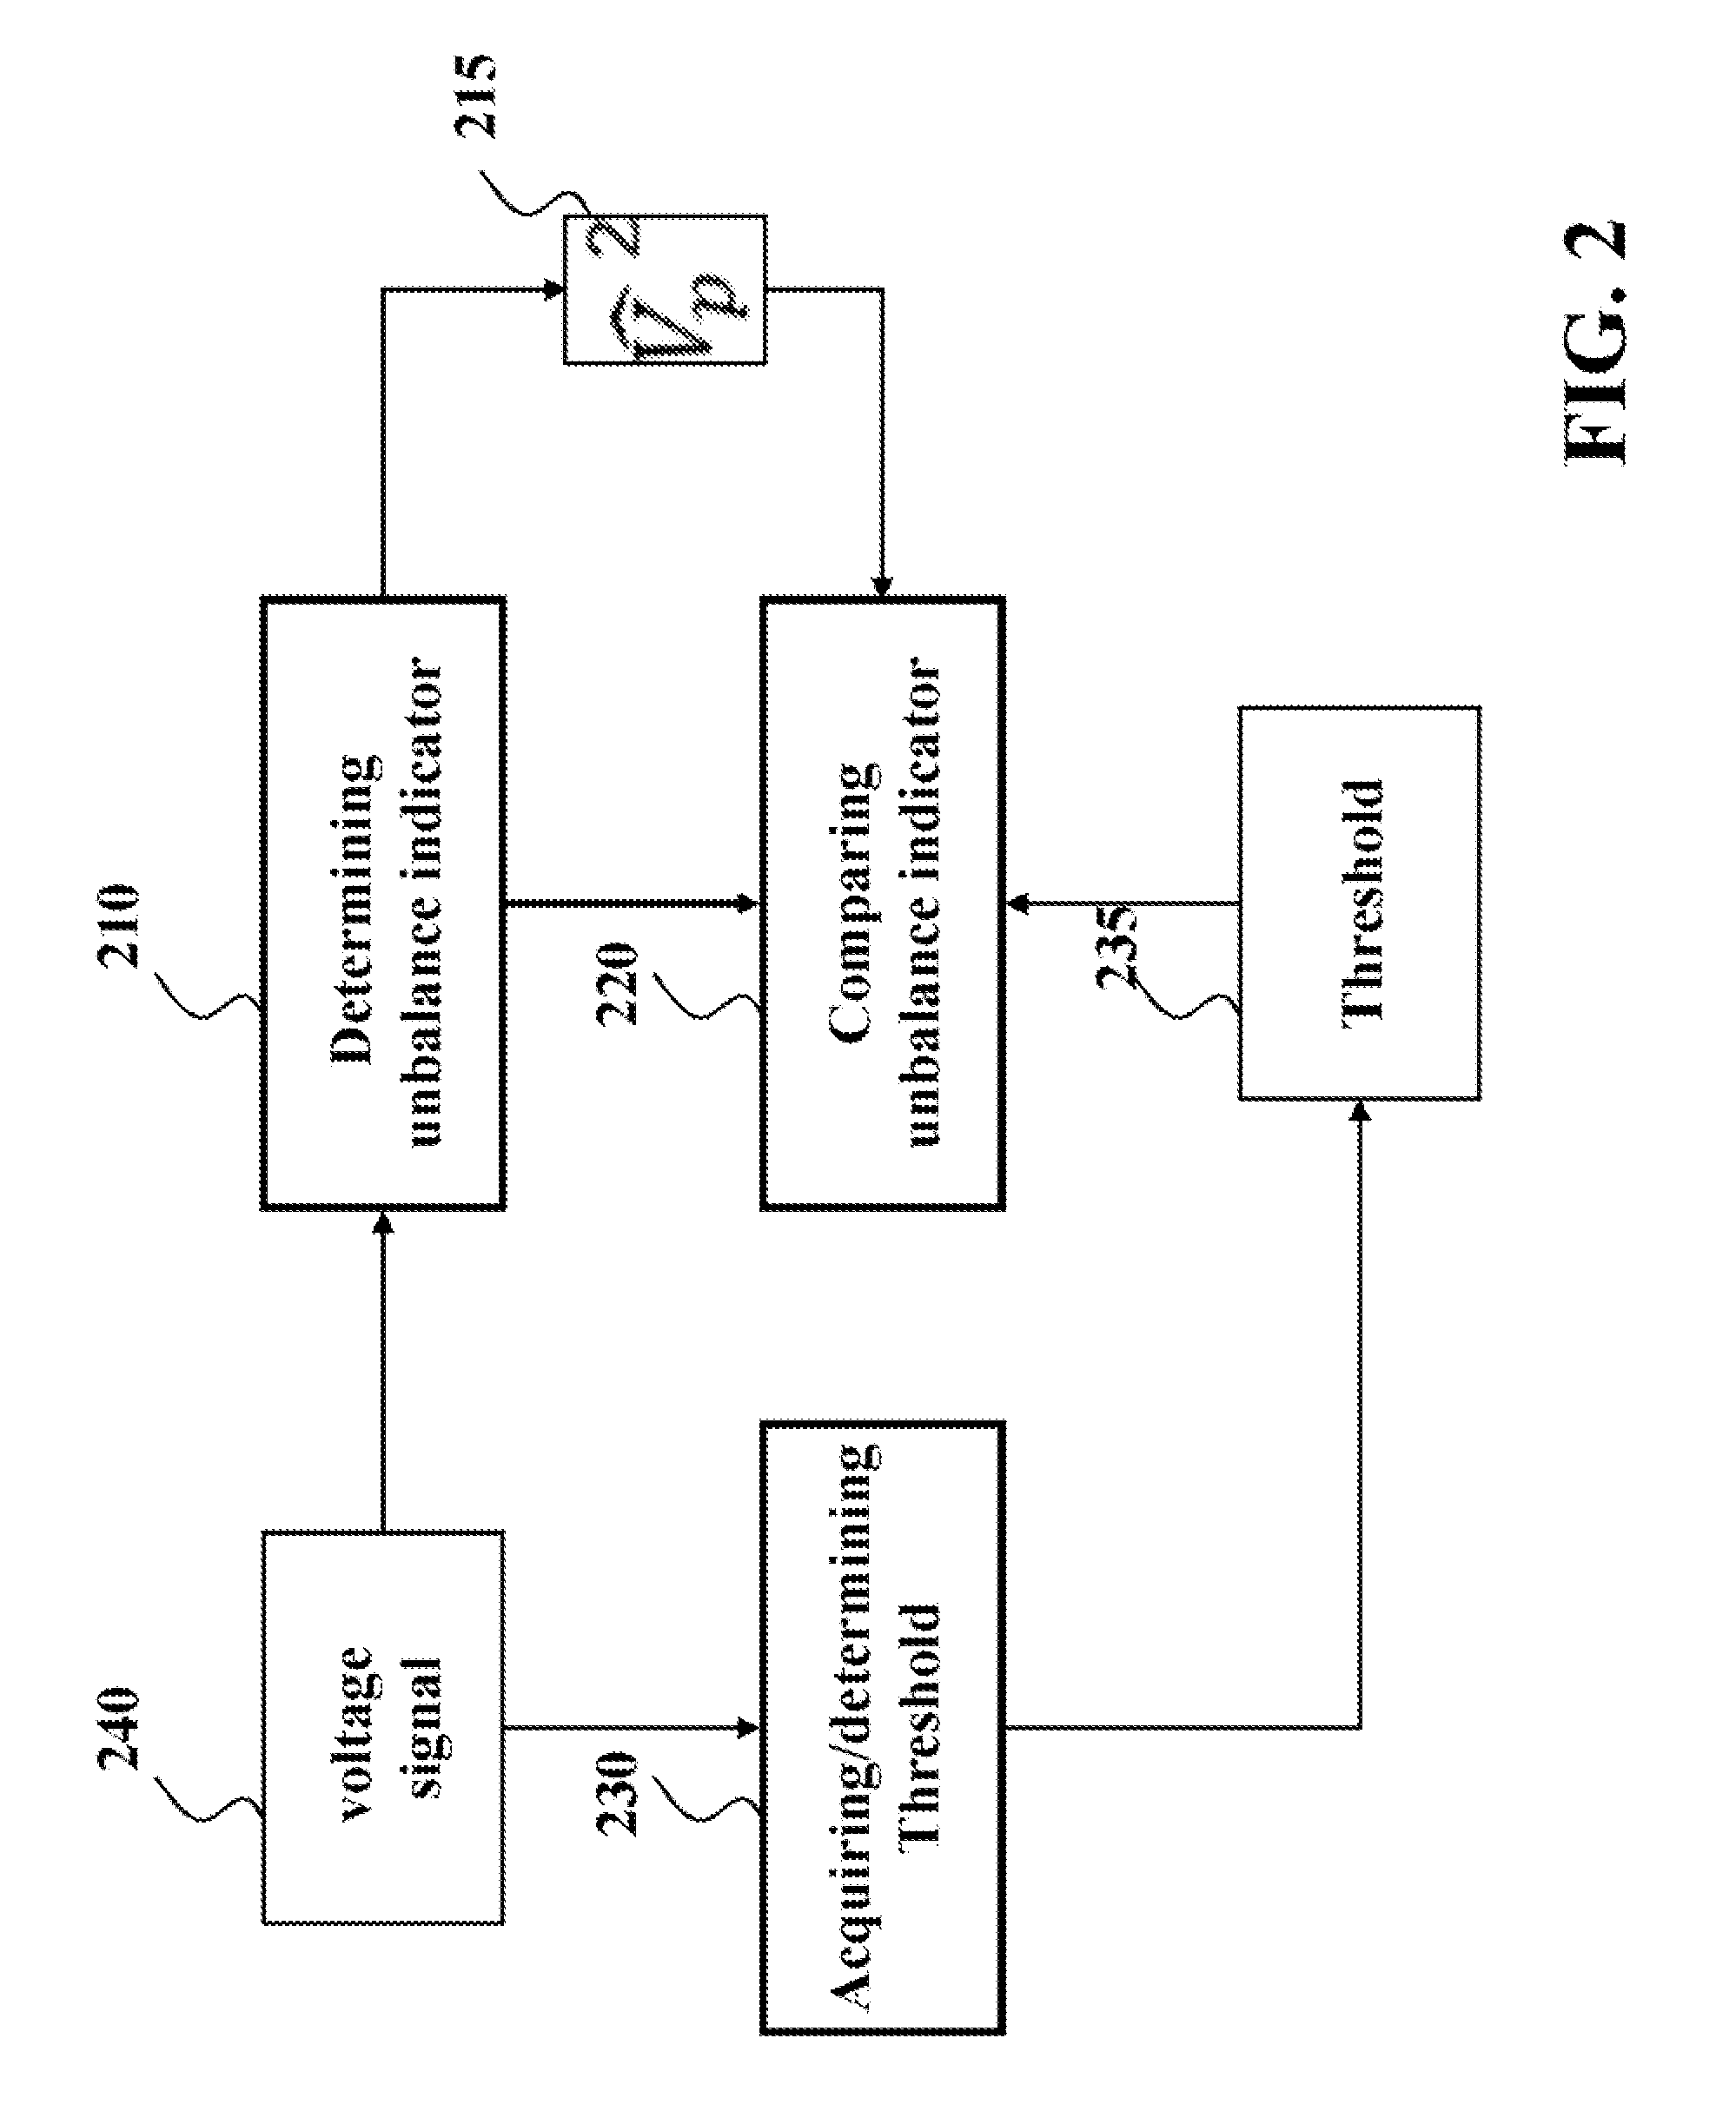 Method and System for Detecting Unbalance in Power Grids